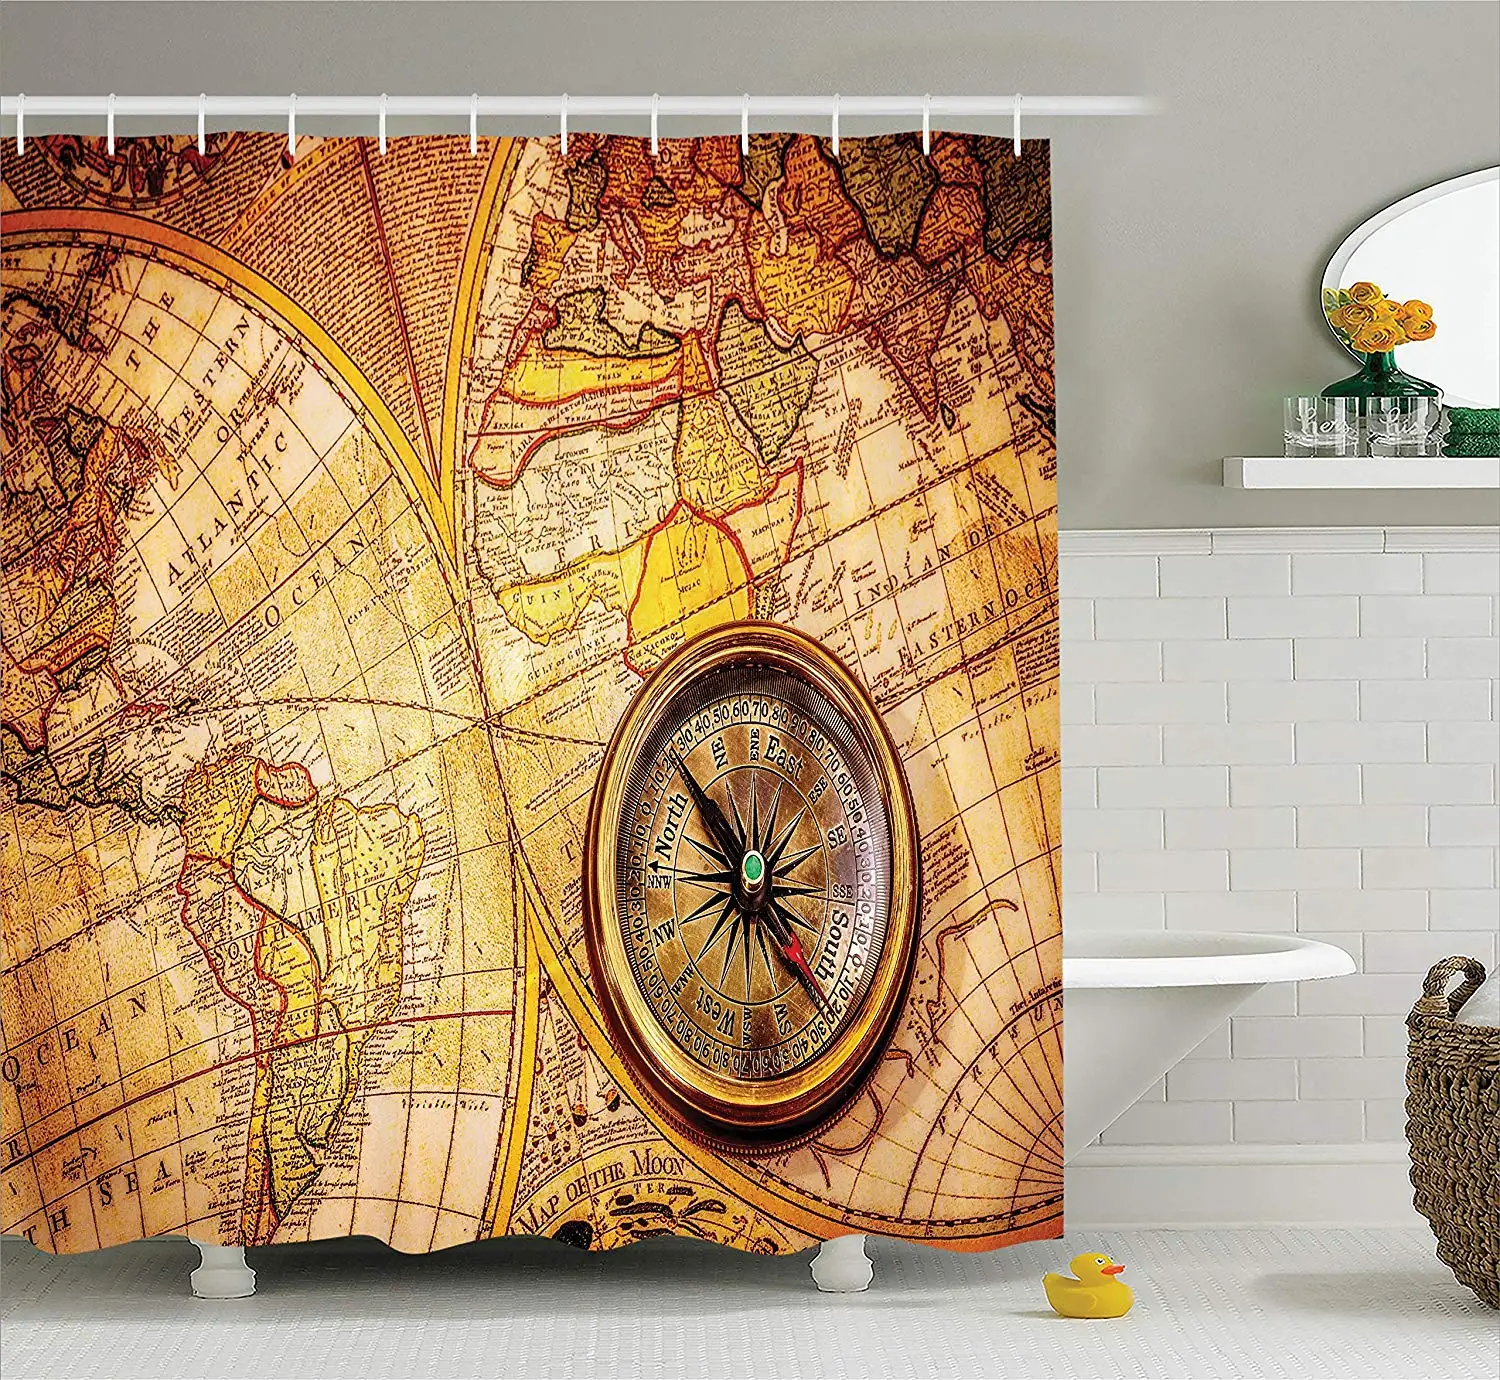 

Antique Shower Curtain Compass On An Ancient World Map Historic Borders Century-Old Antiquity Bathroom Decor